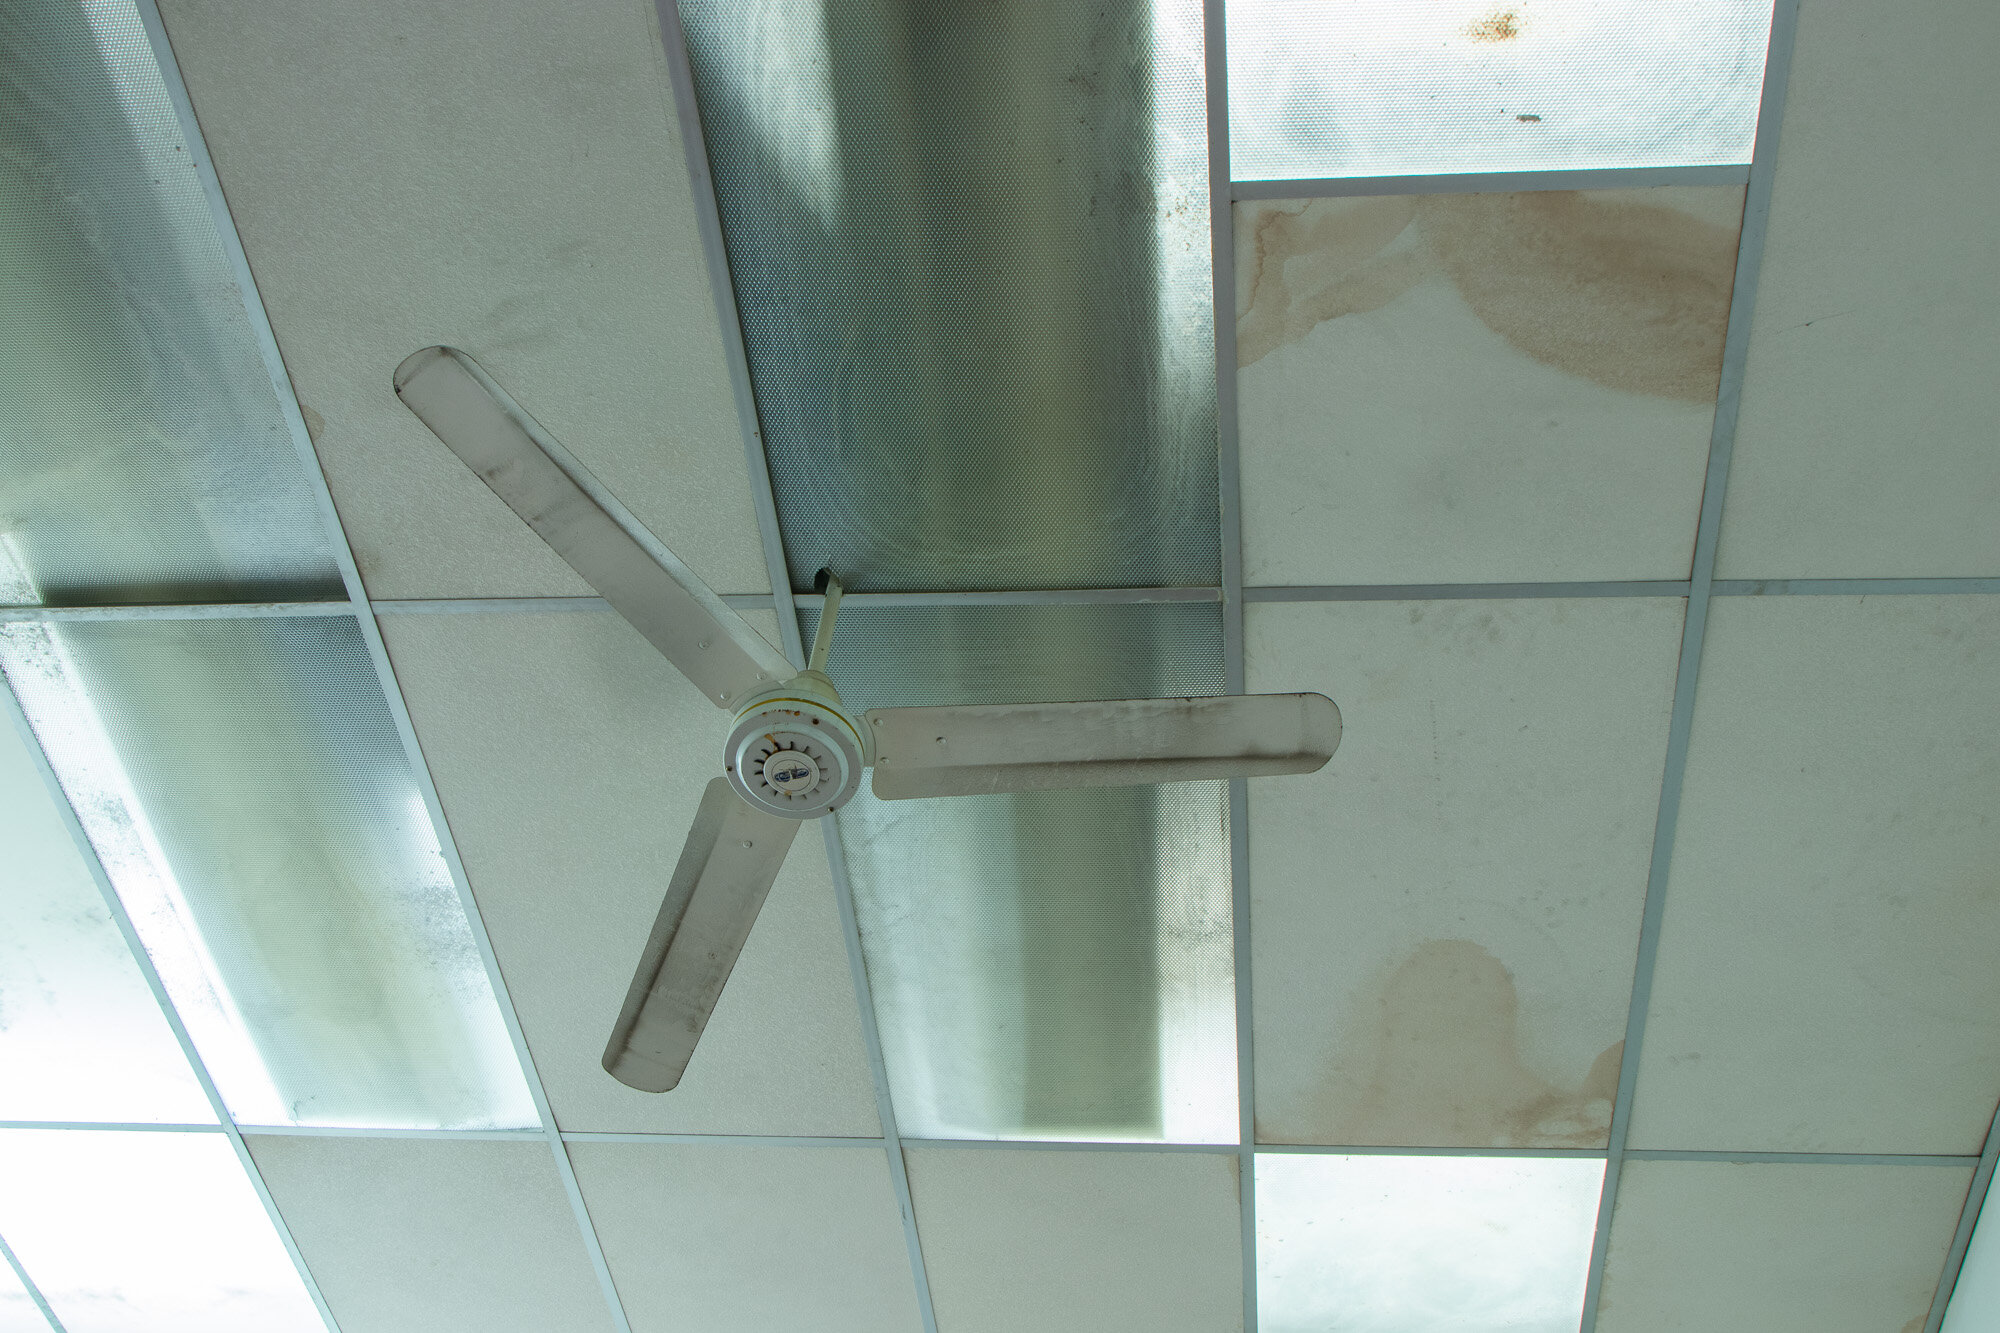 Drop ceiling section with fan